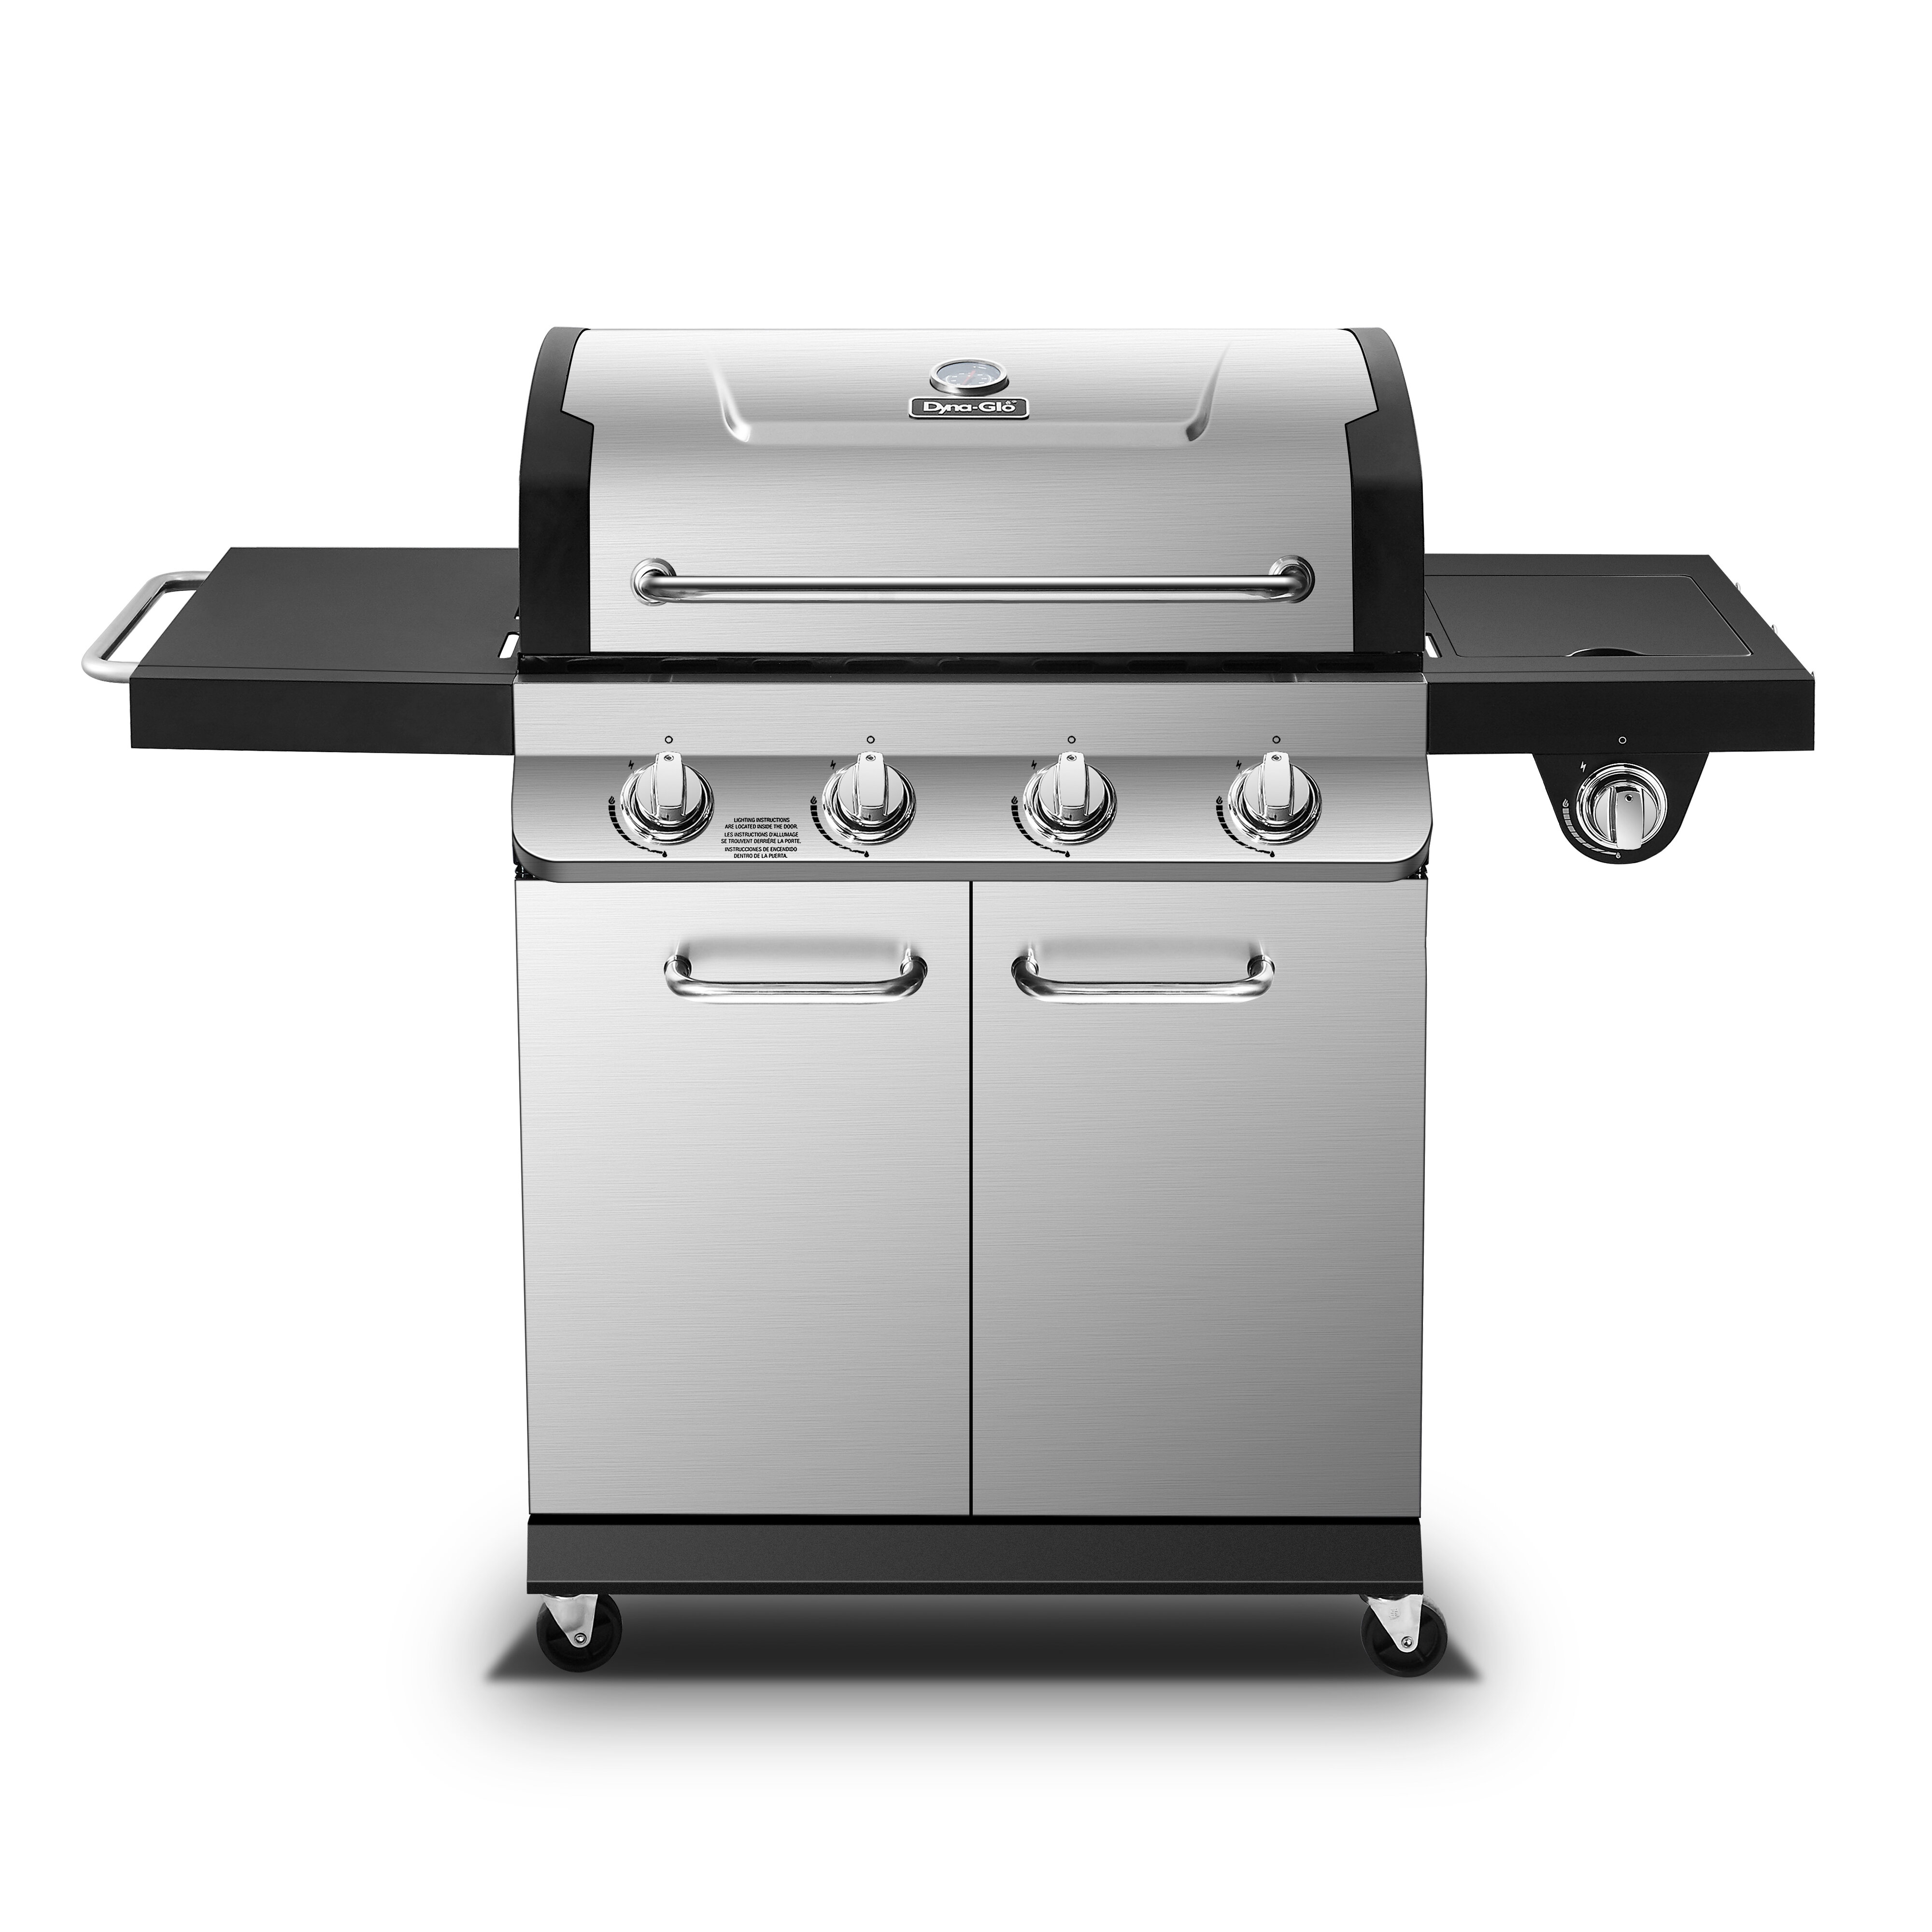 Dyna Glo Premier 4 Burner Convertible Gas Grill With Side Burner Reviews Wayfair